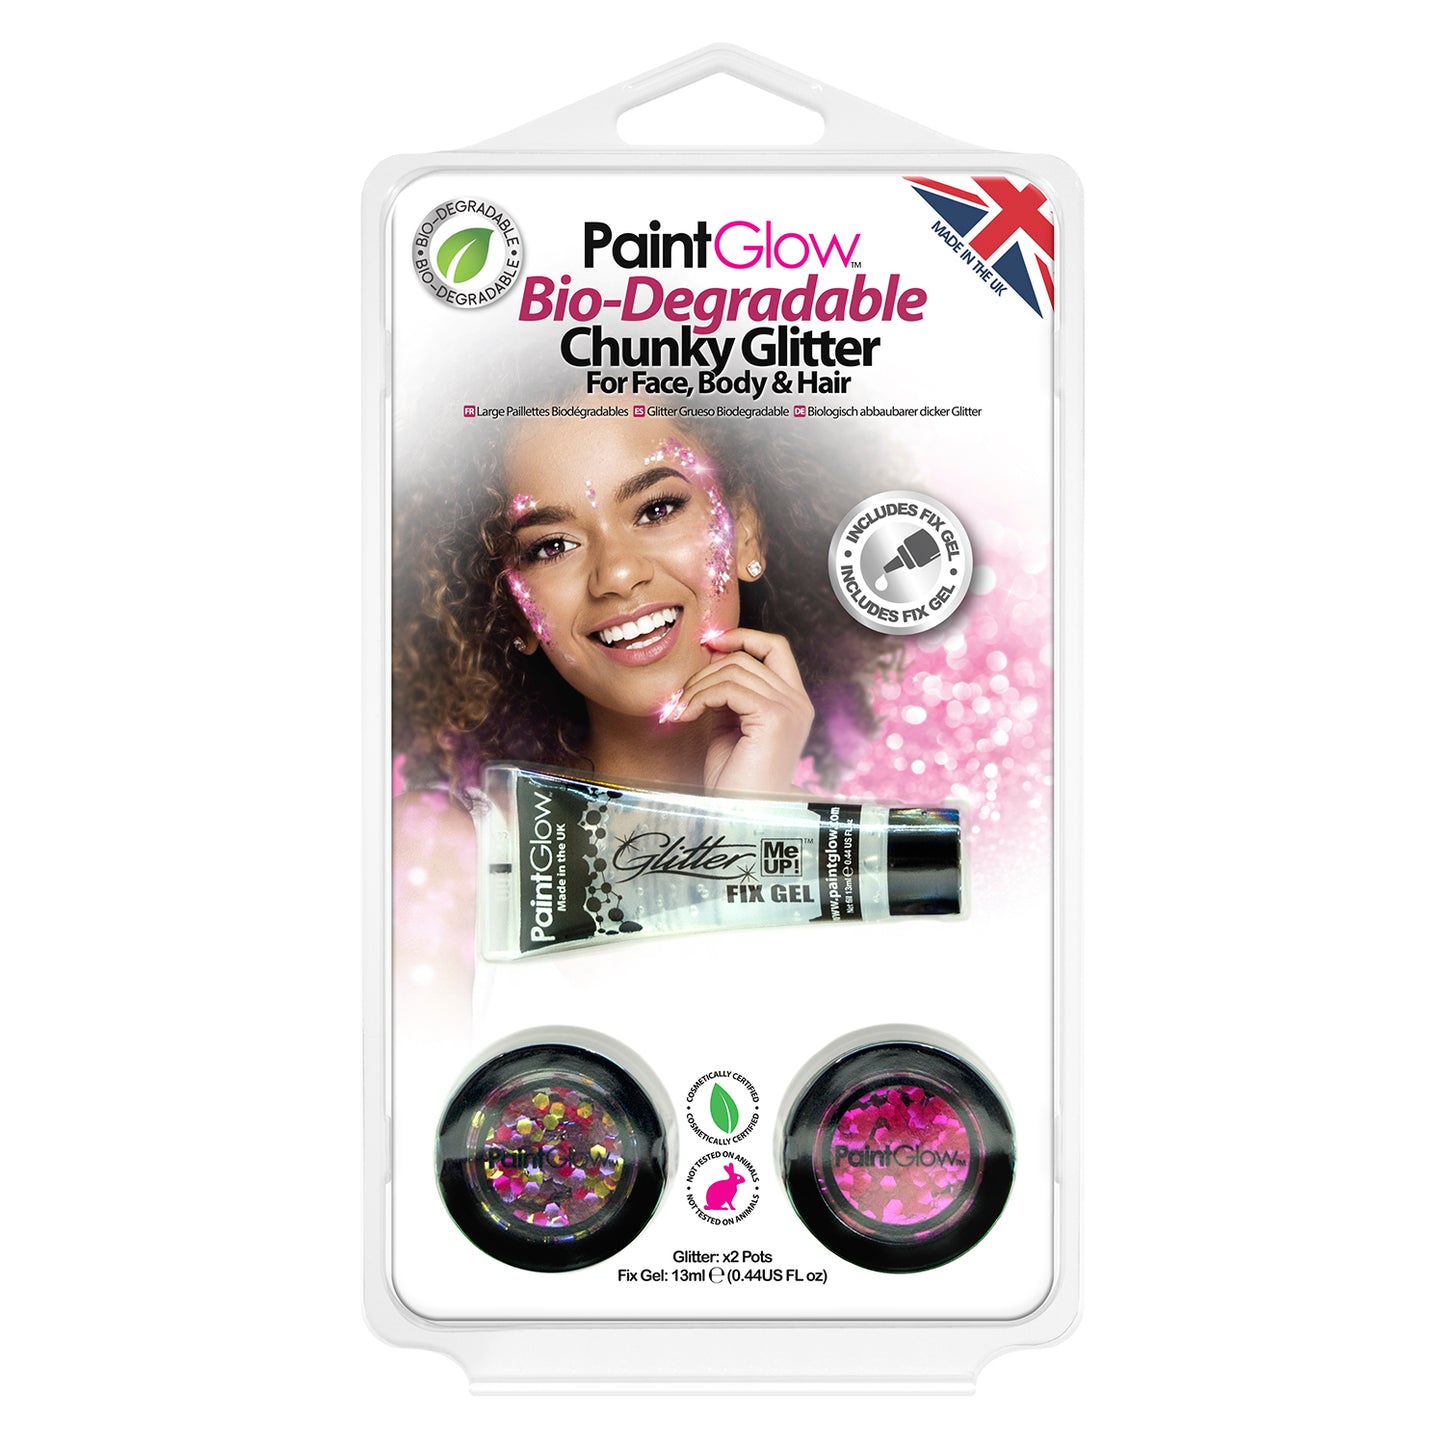 PaintGlow Bio-Degradable Chunky Glitter for Face, Body & Hair (Pack 8)